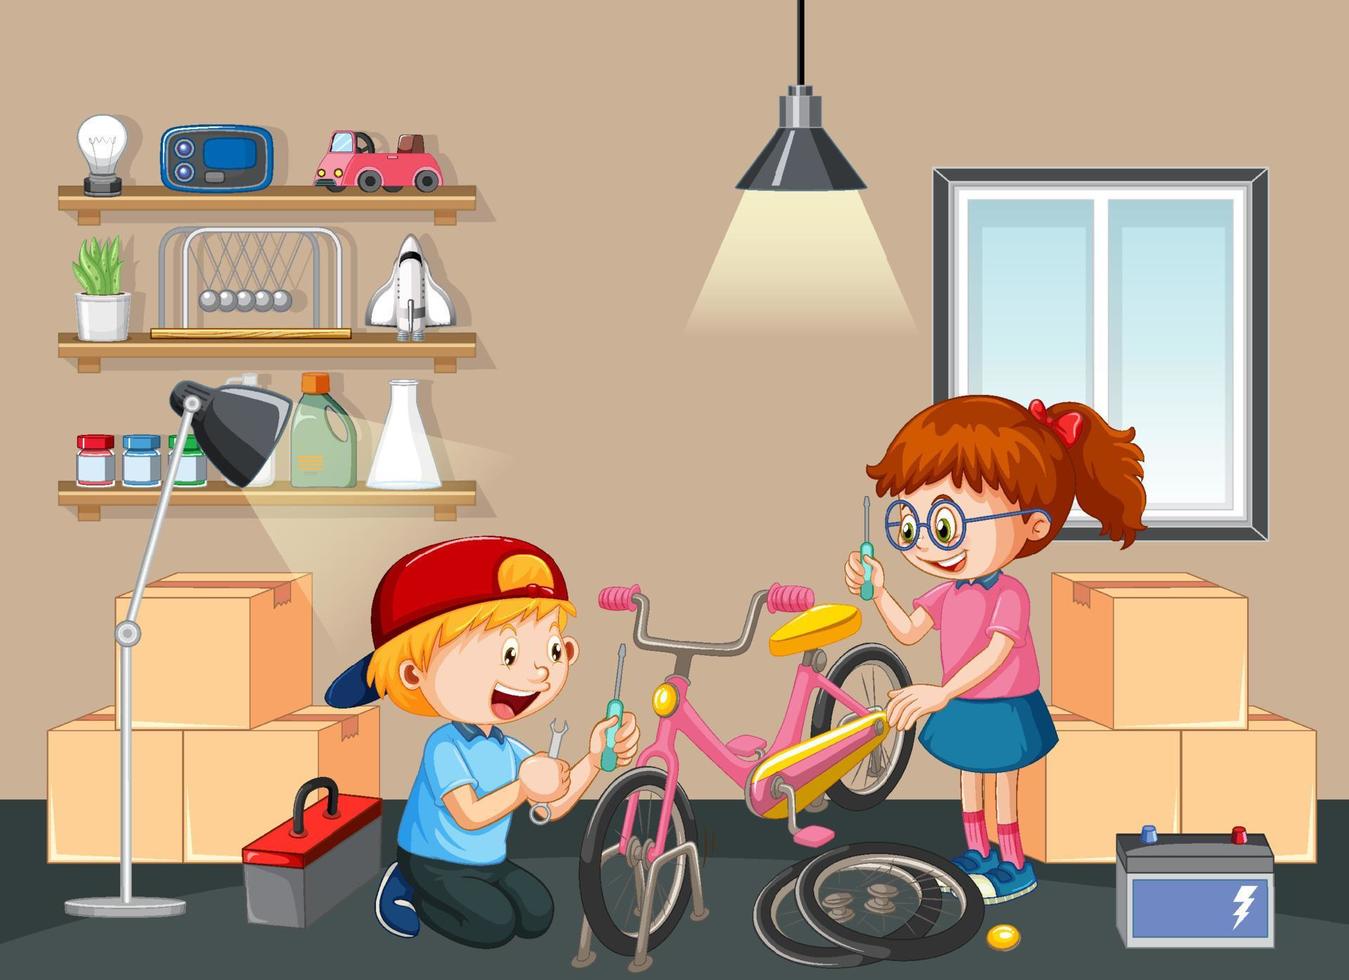 Children fixing a bicycle together in the room scene vector